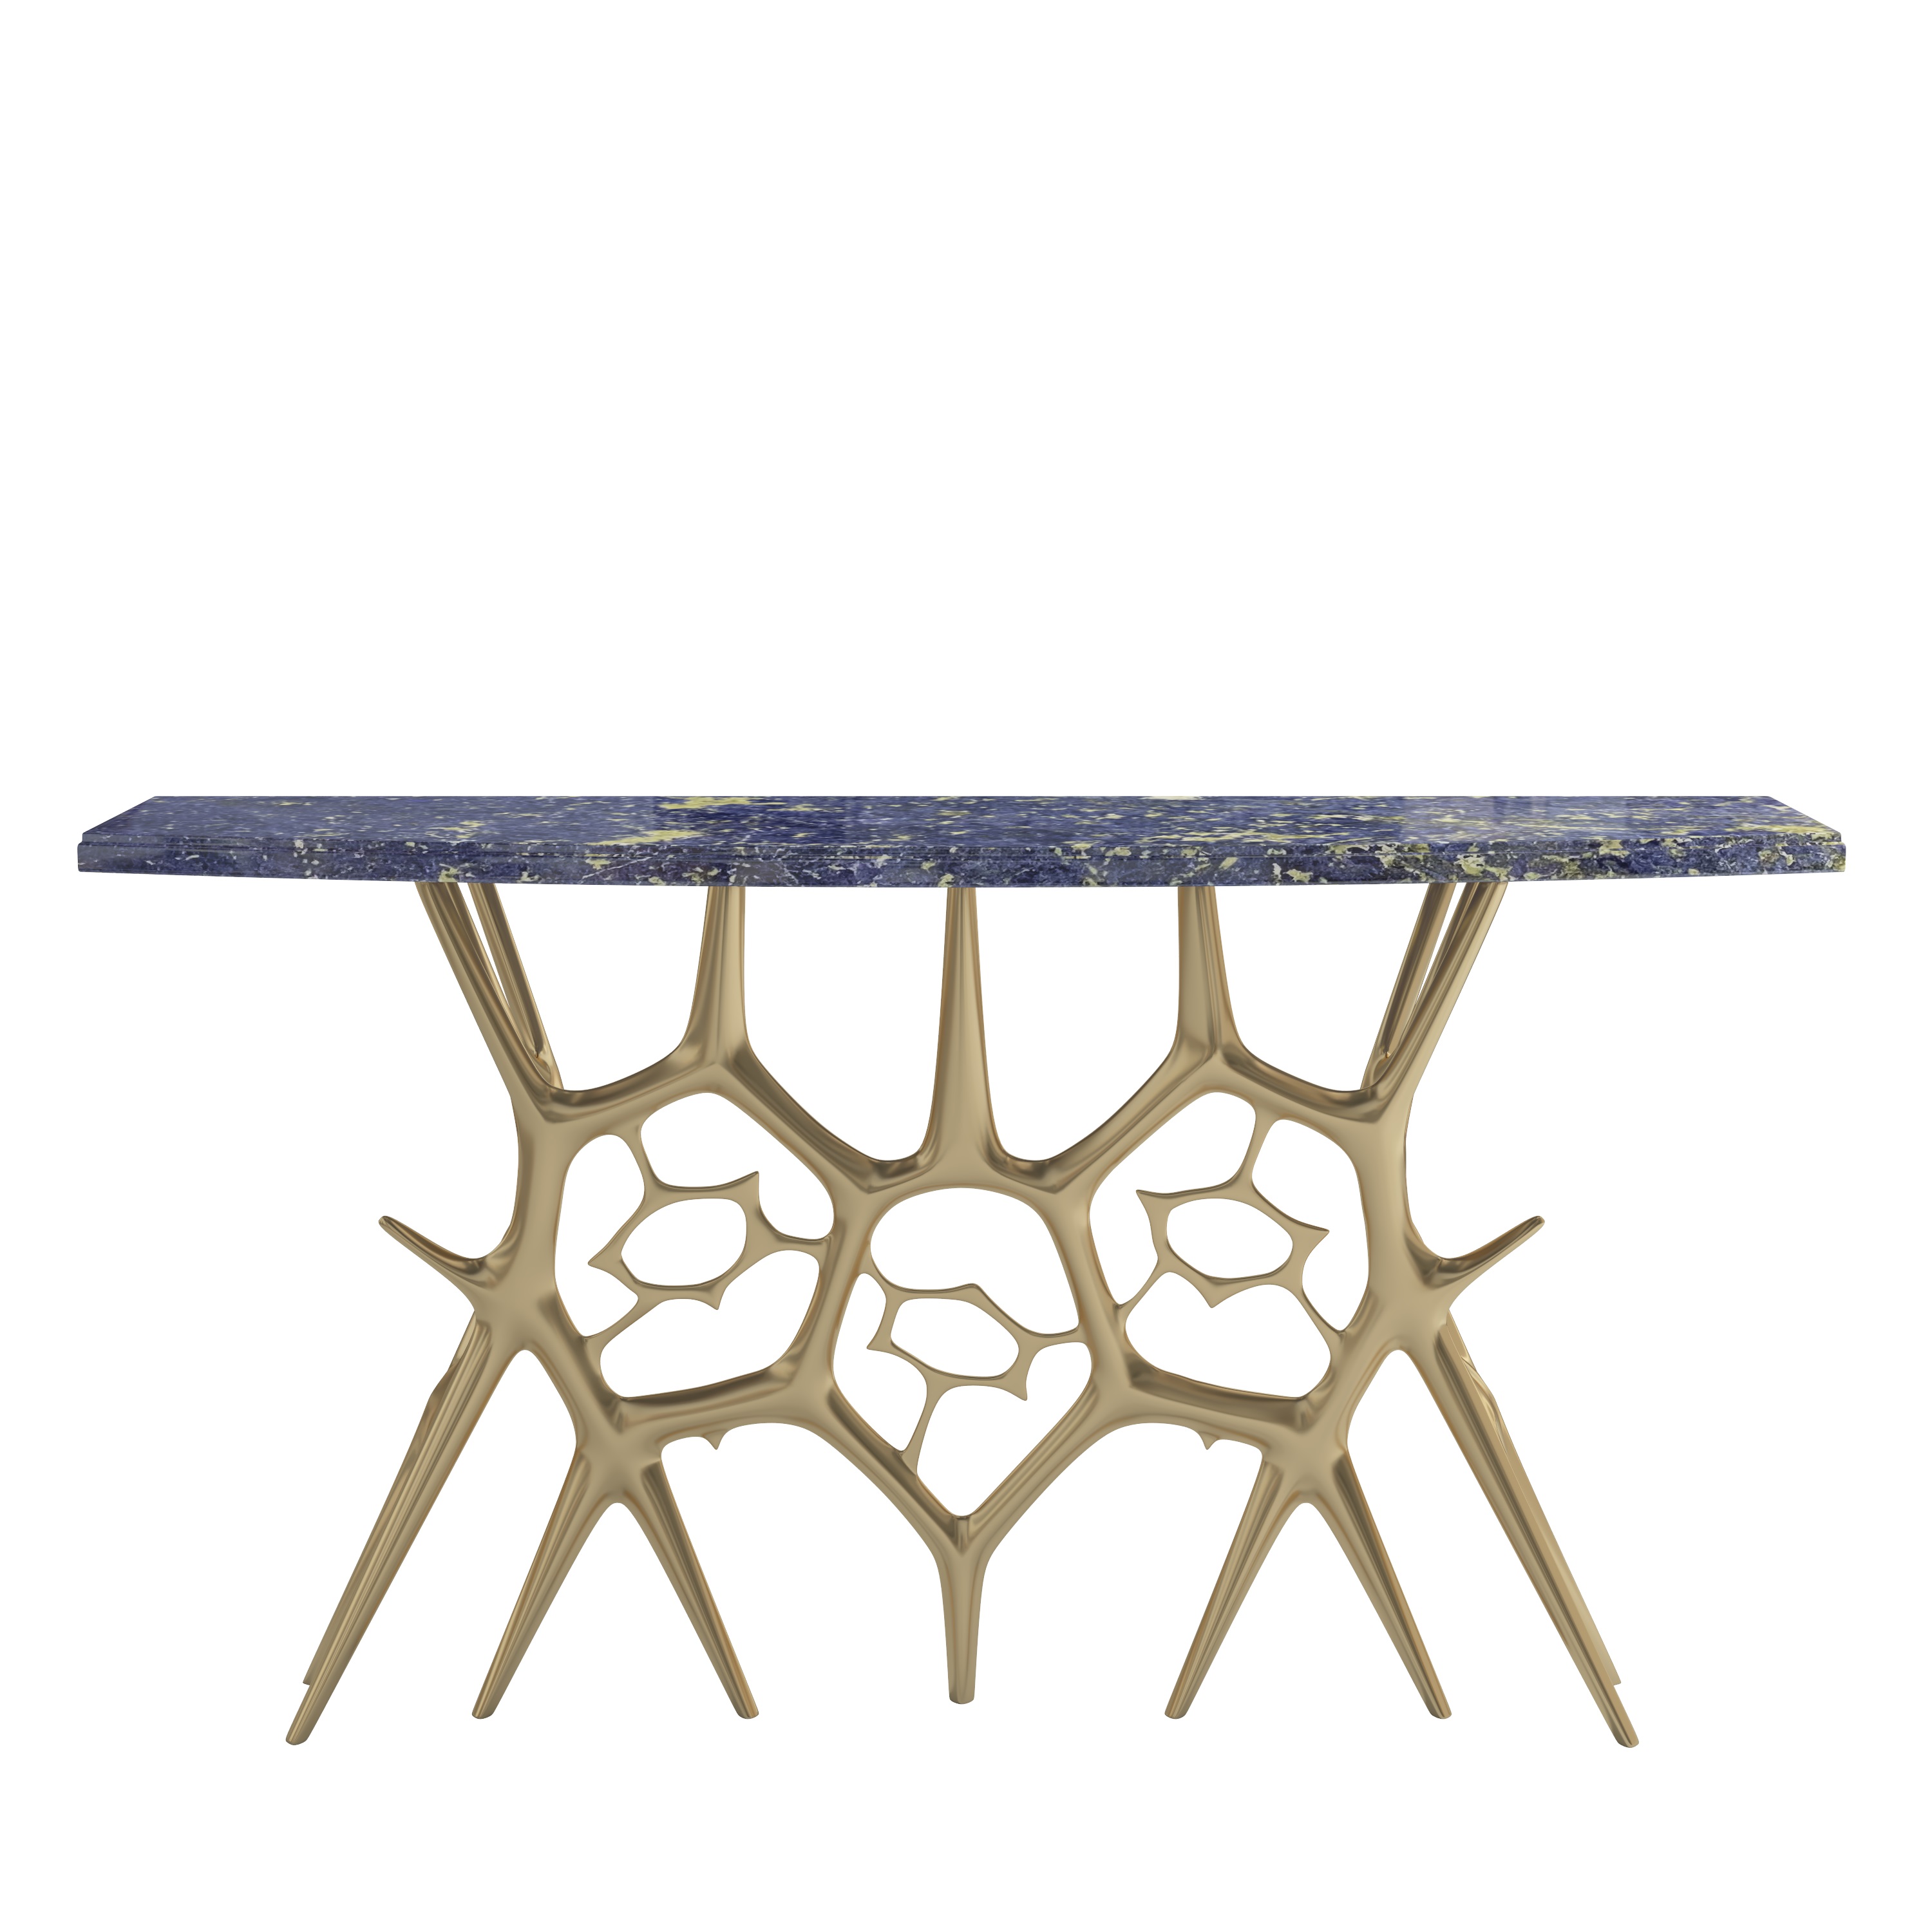 Multi-ring brass console table